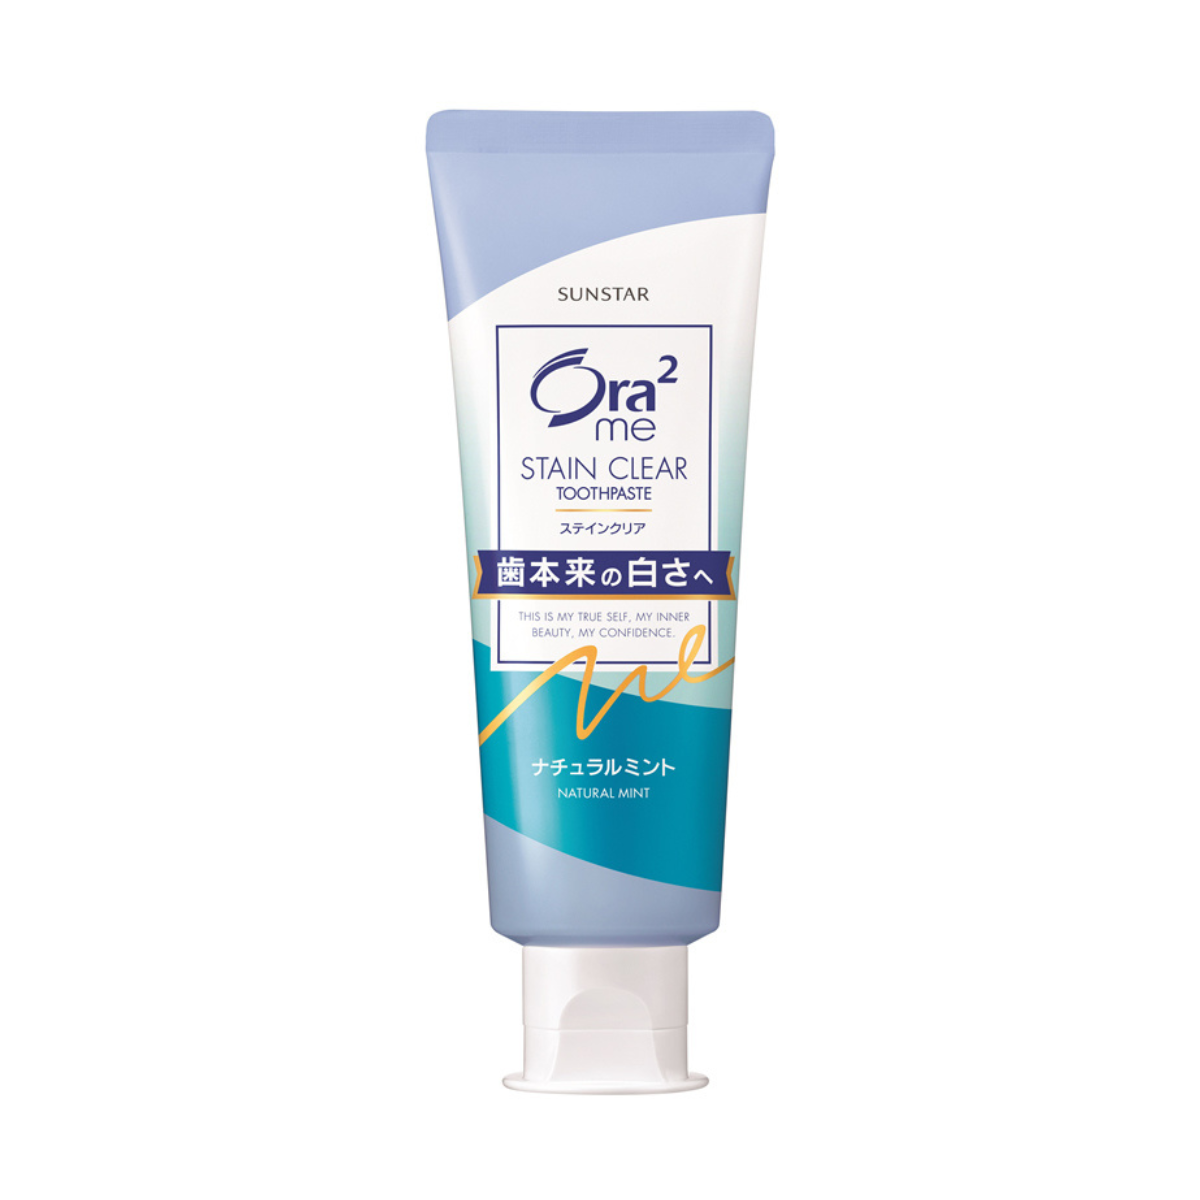 ORA2 Stain Removal Teeth Cleaning Toothpaste